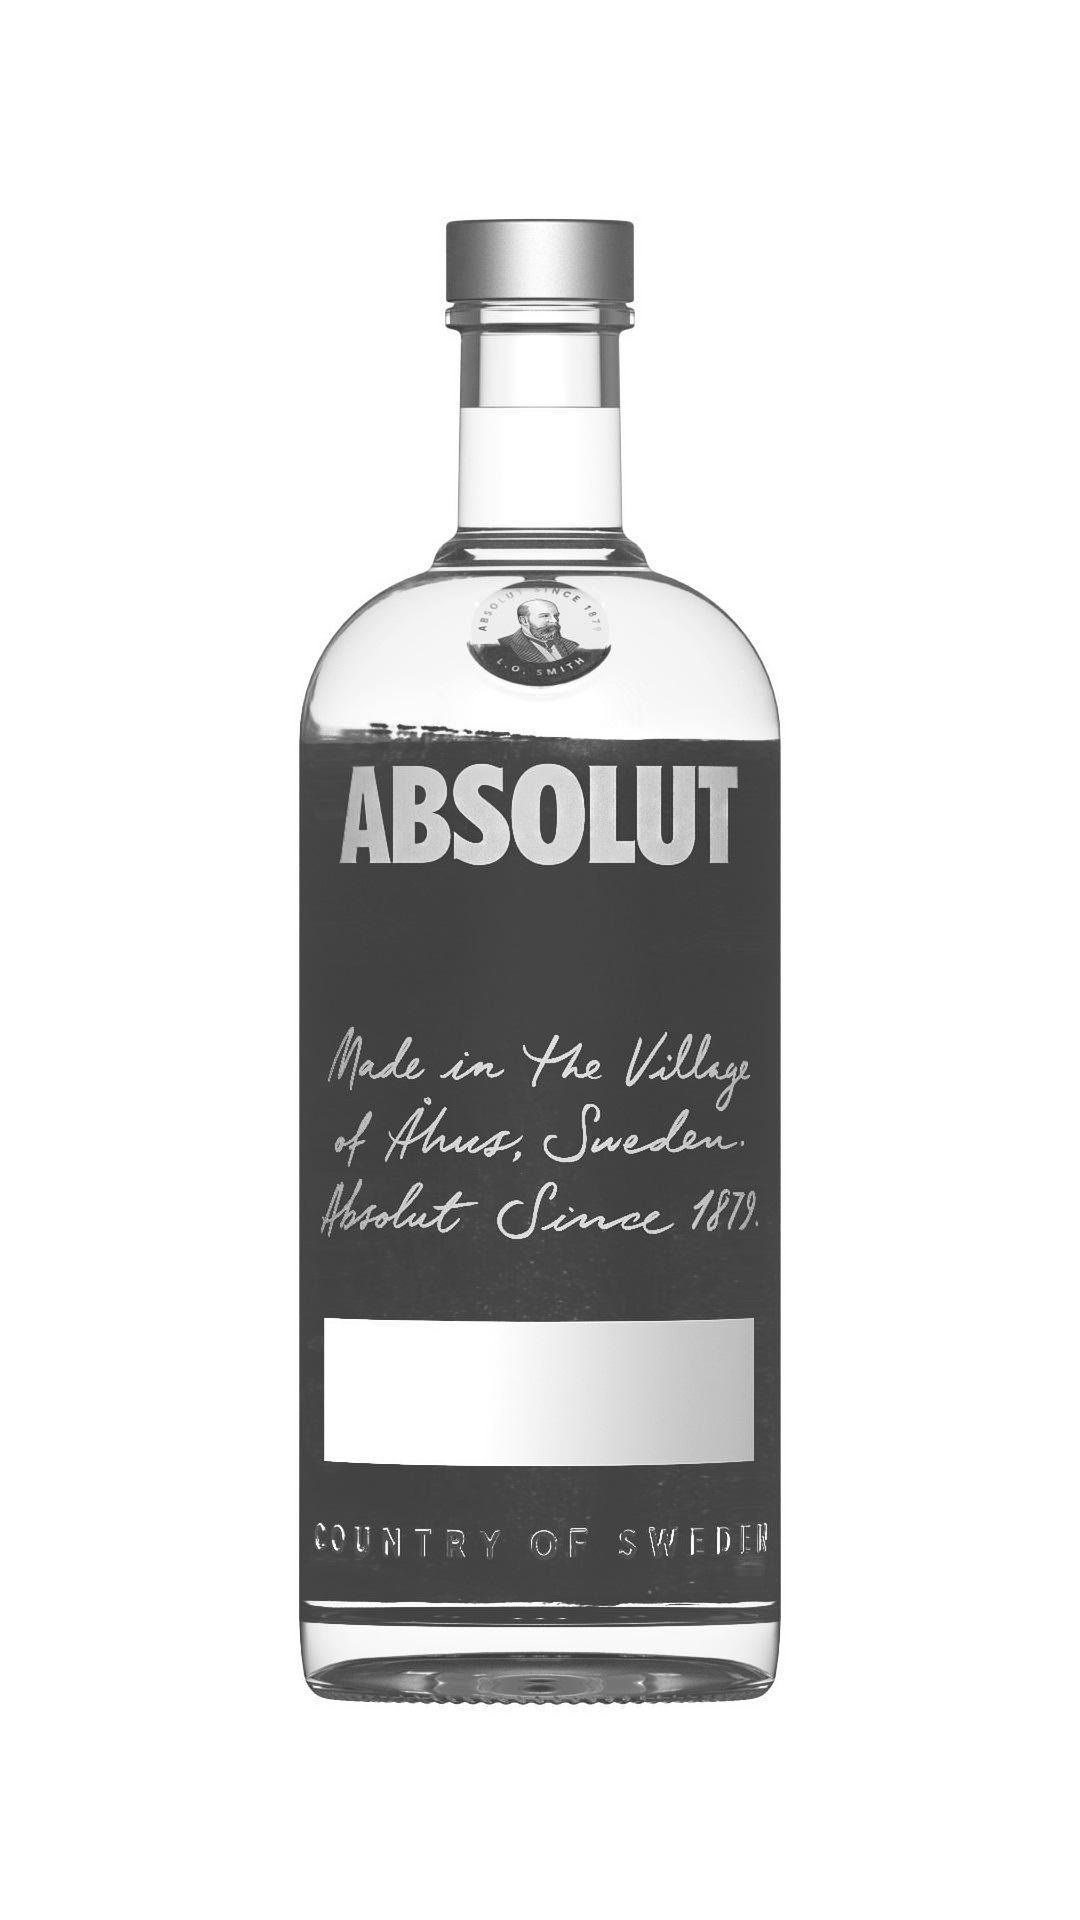 Trademark Logo ABSOLUT SINCE 1879 L.O. SMITH ABSOLUT MADE IN THE VILLAGE OF ÅHUS, SWEDEN. ABSOLUT SINCE 1879. COUNTRY OF SWEDEN